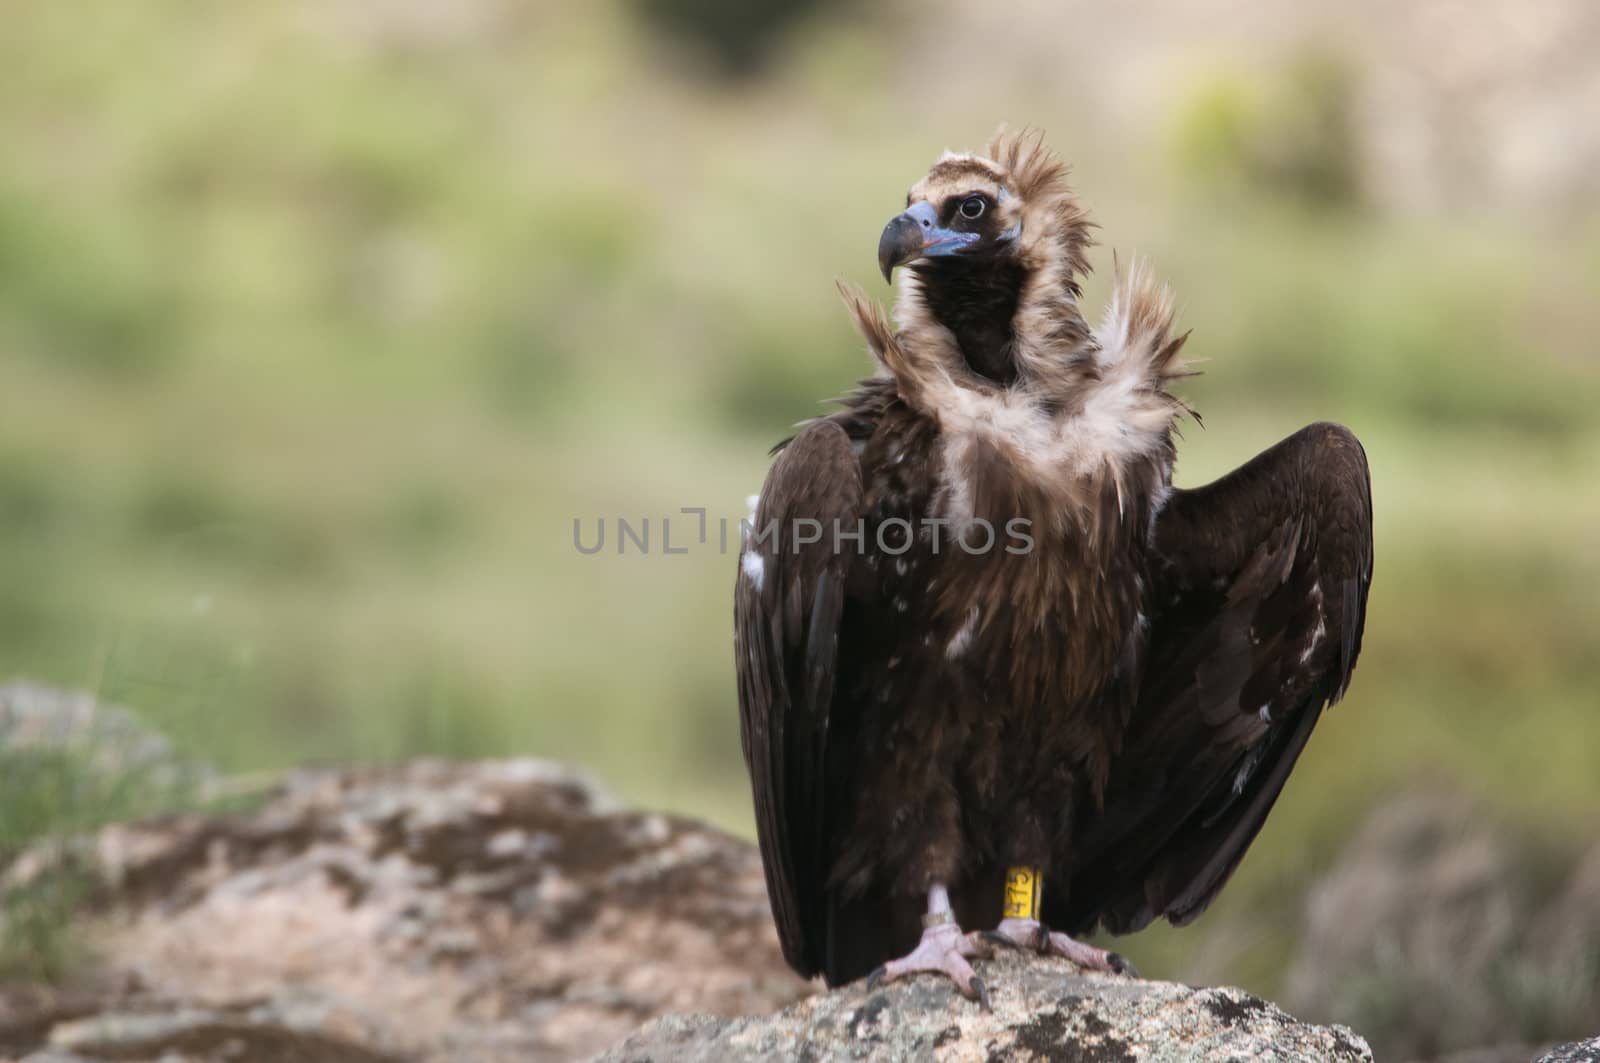 Cinereous Vulture, Aegypius monachus, standing on a rock